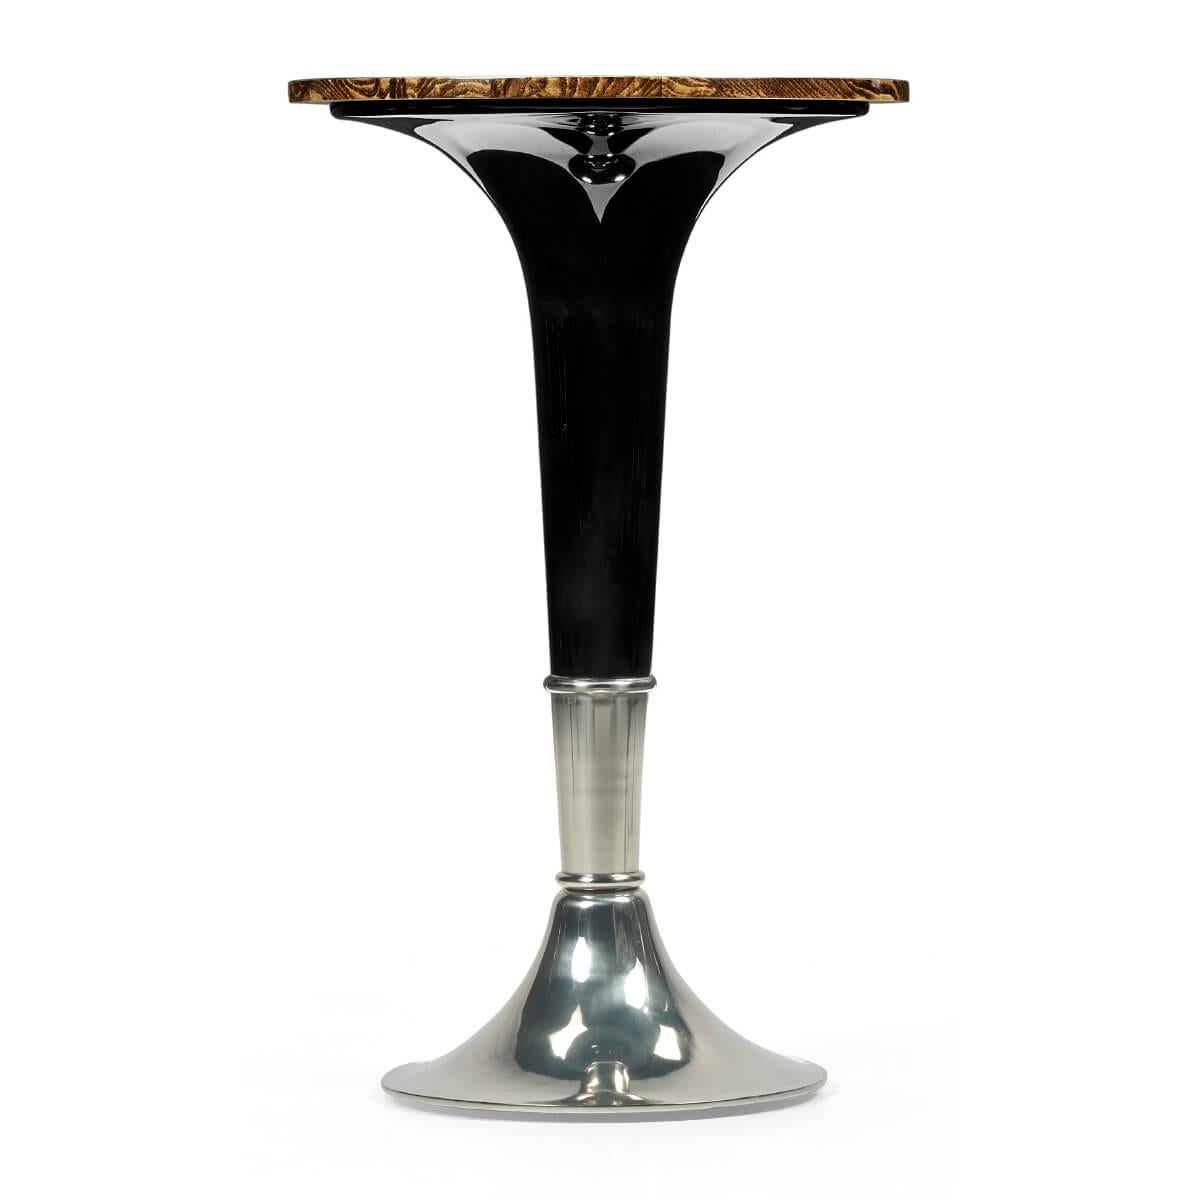 An Art Deco-inspired pedestal occasional table with an amber ash burl top on a black lacquered and stainless steel tapered pedestal base.

Dimensions: 16